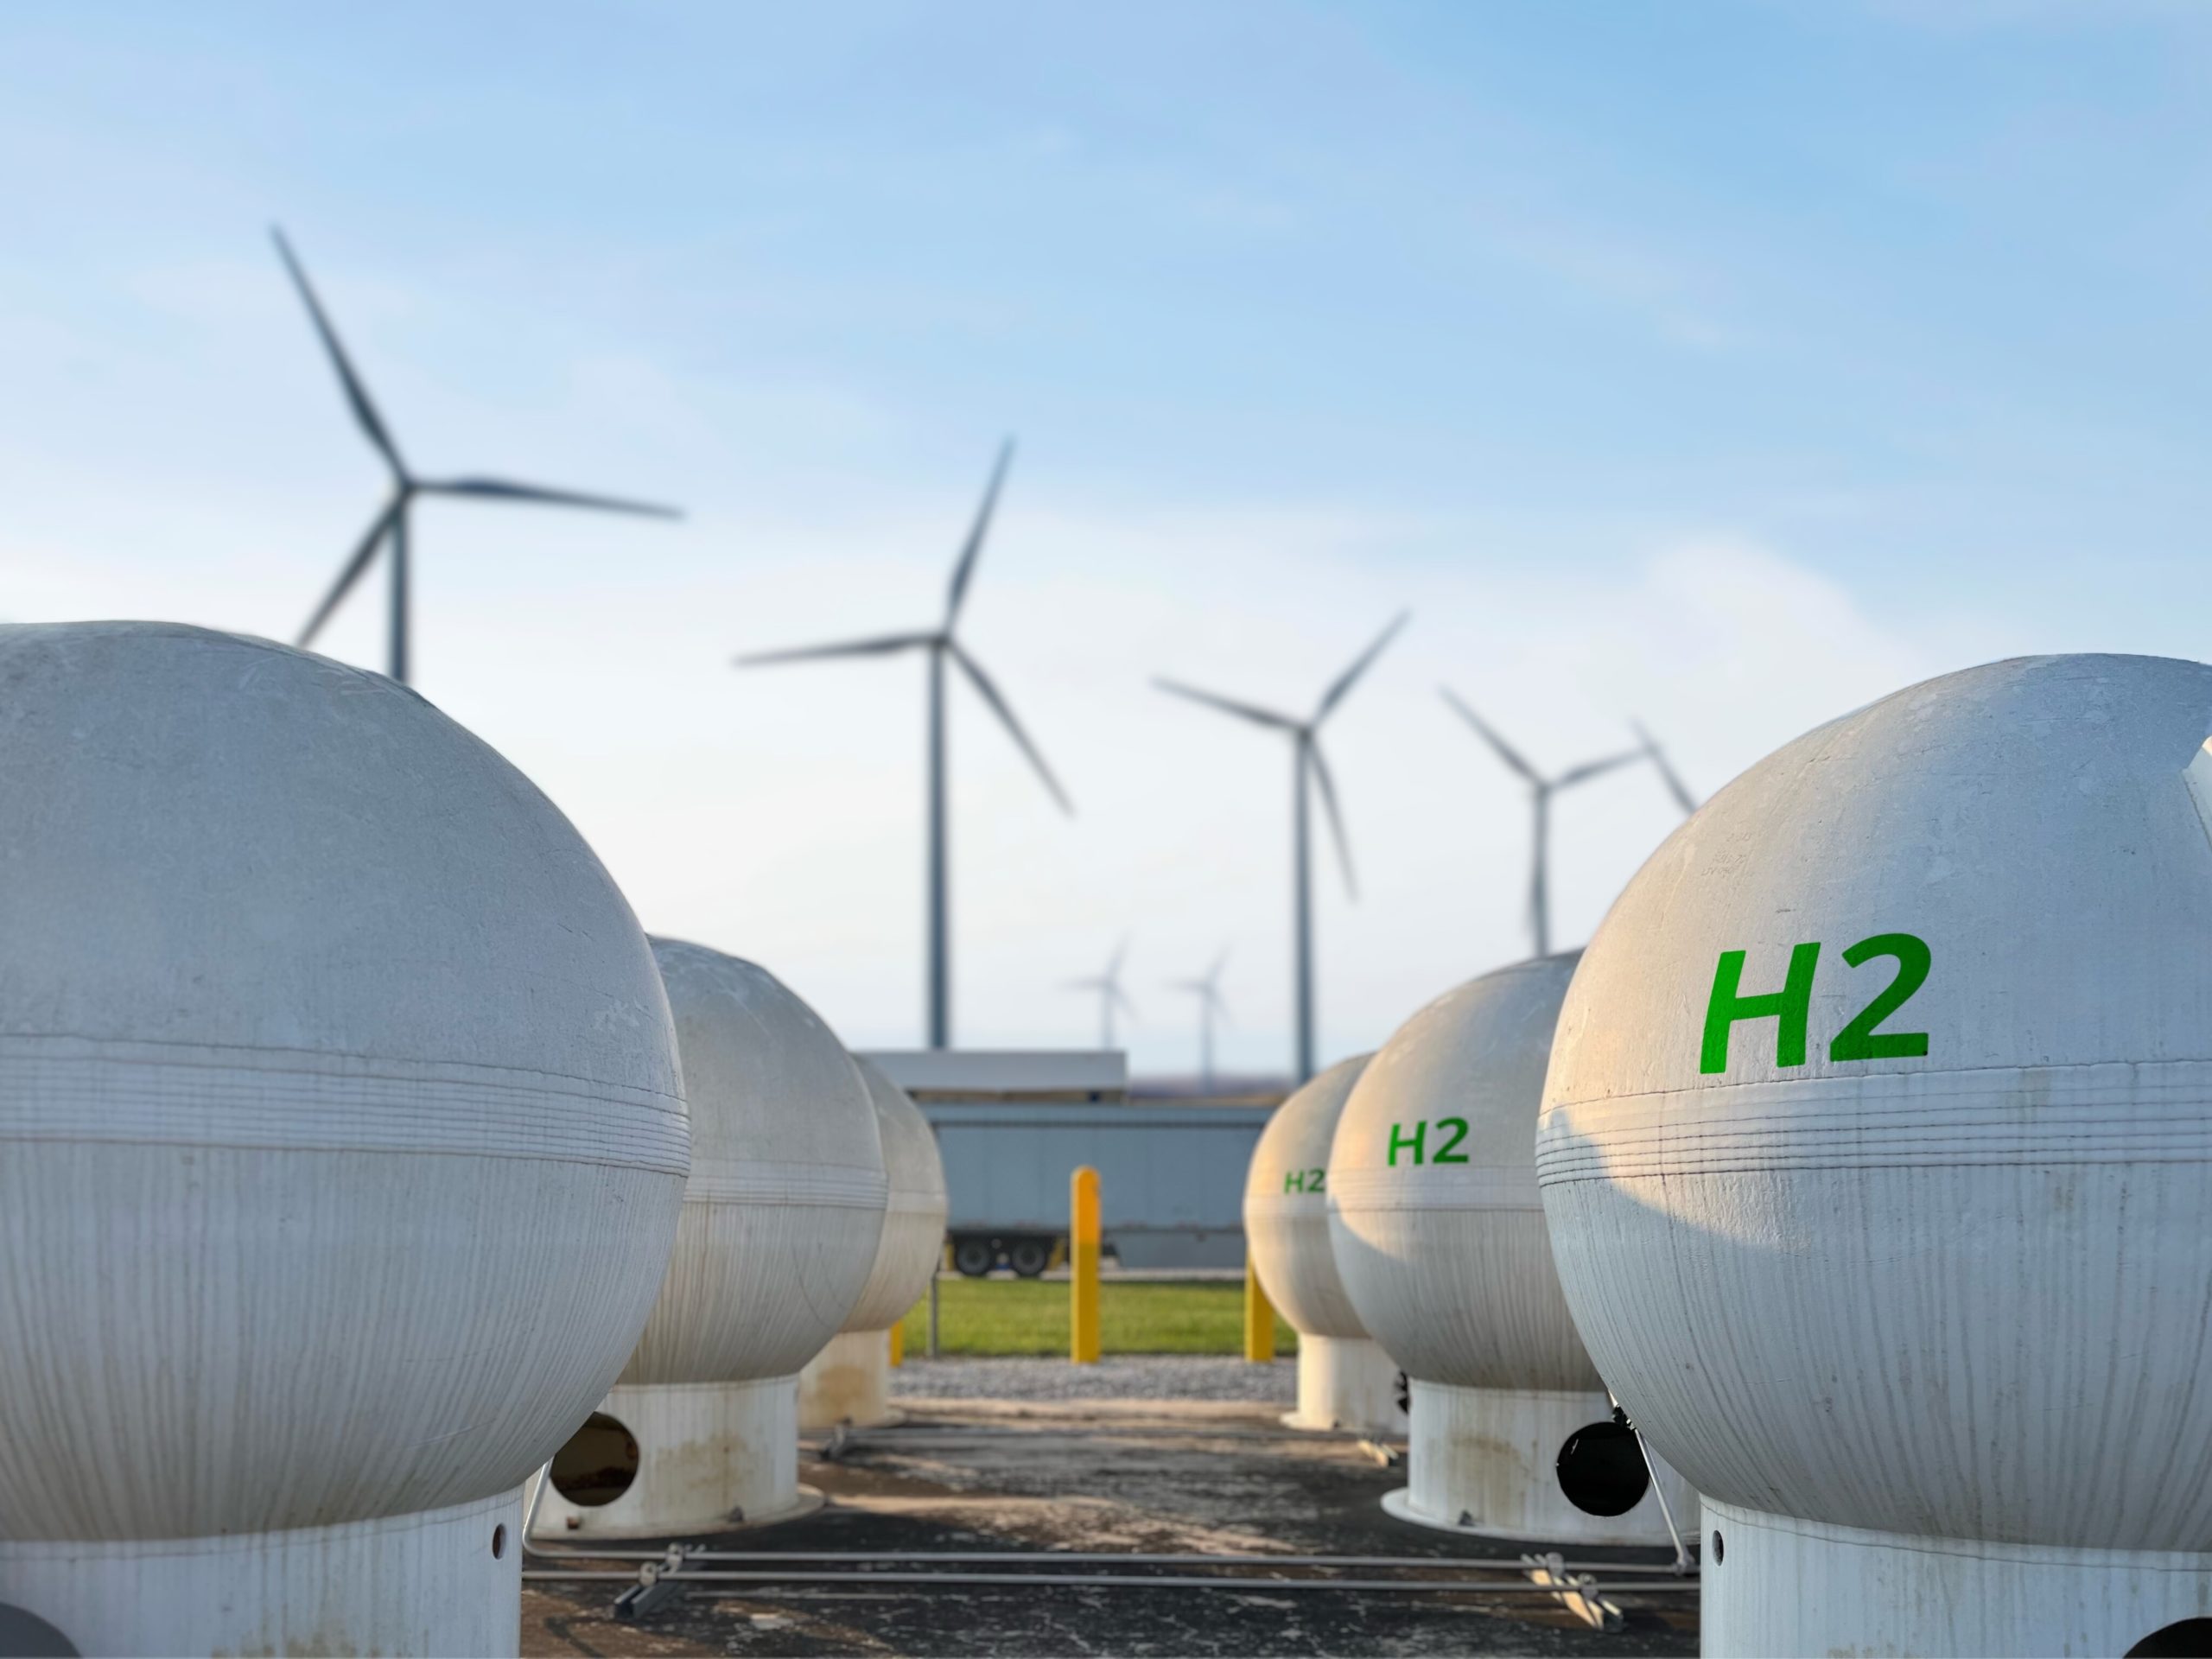 Rows of H2 tanks, with wind turbines in the background.